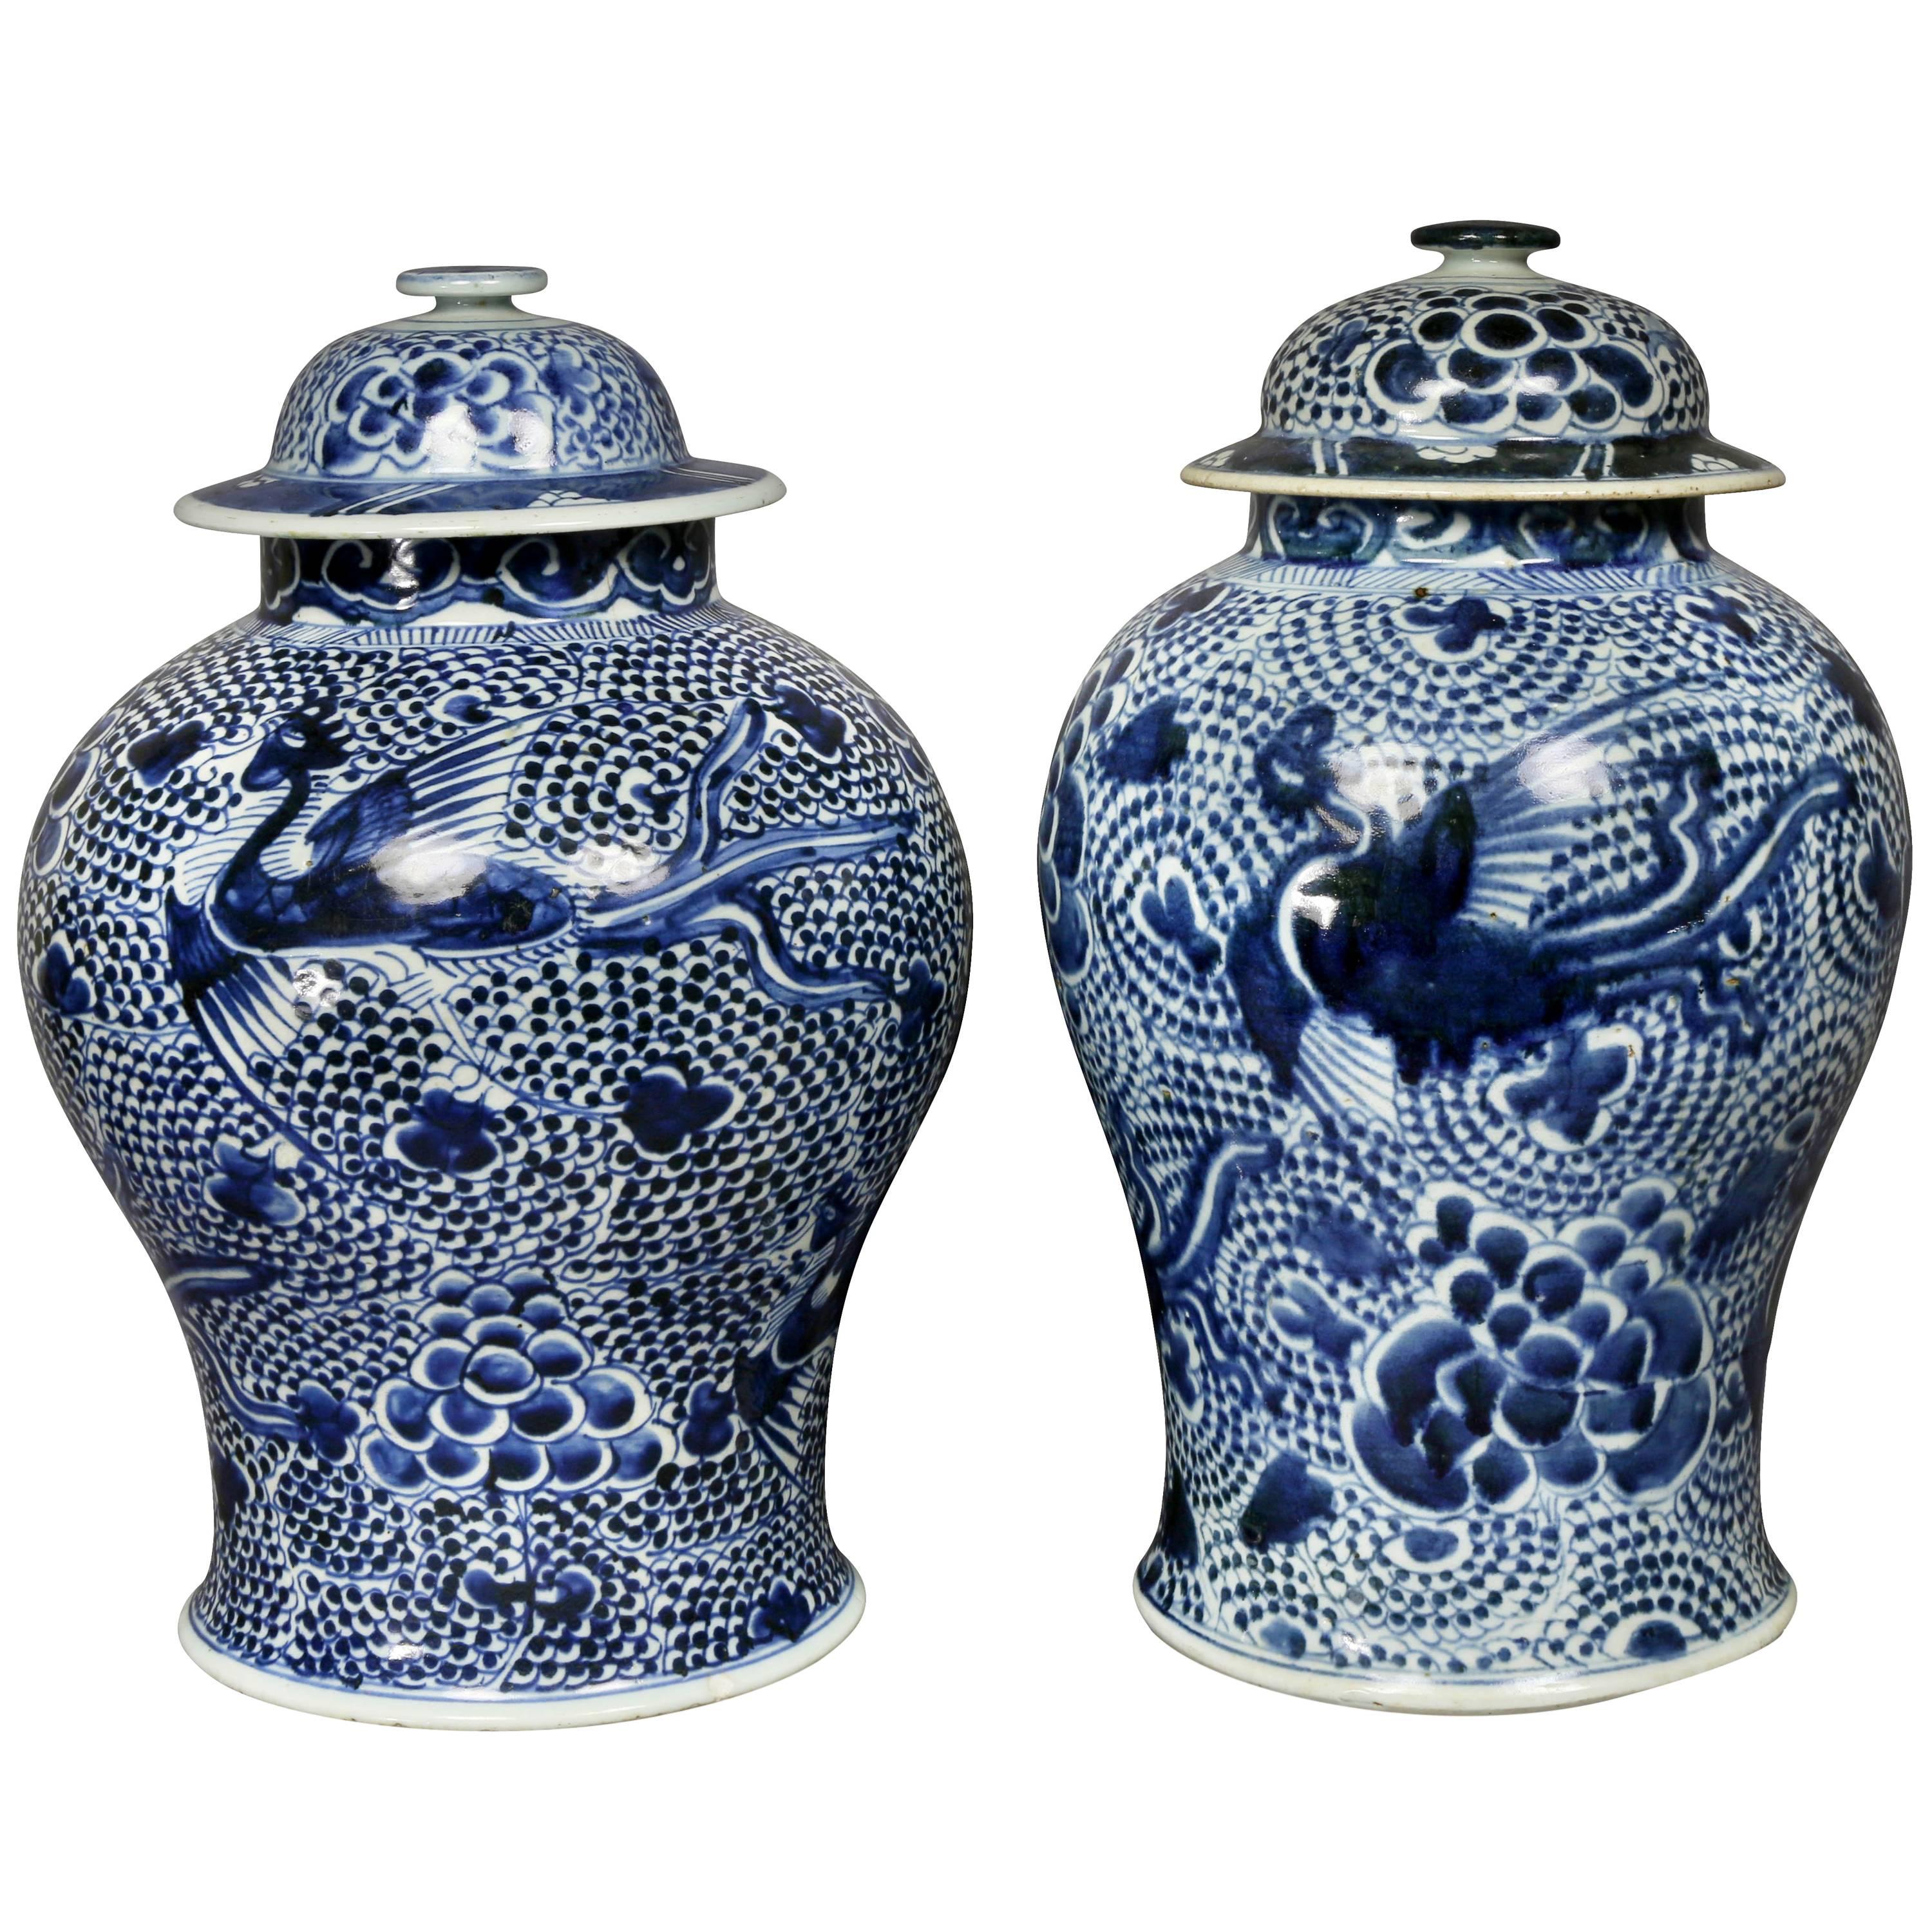 Matched Pair of Chinese Blue and White Covered Jars